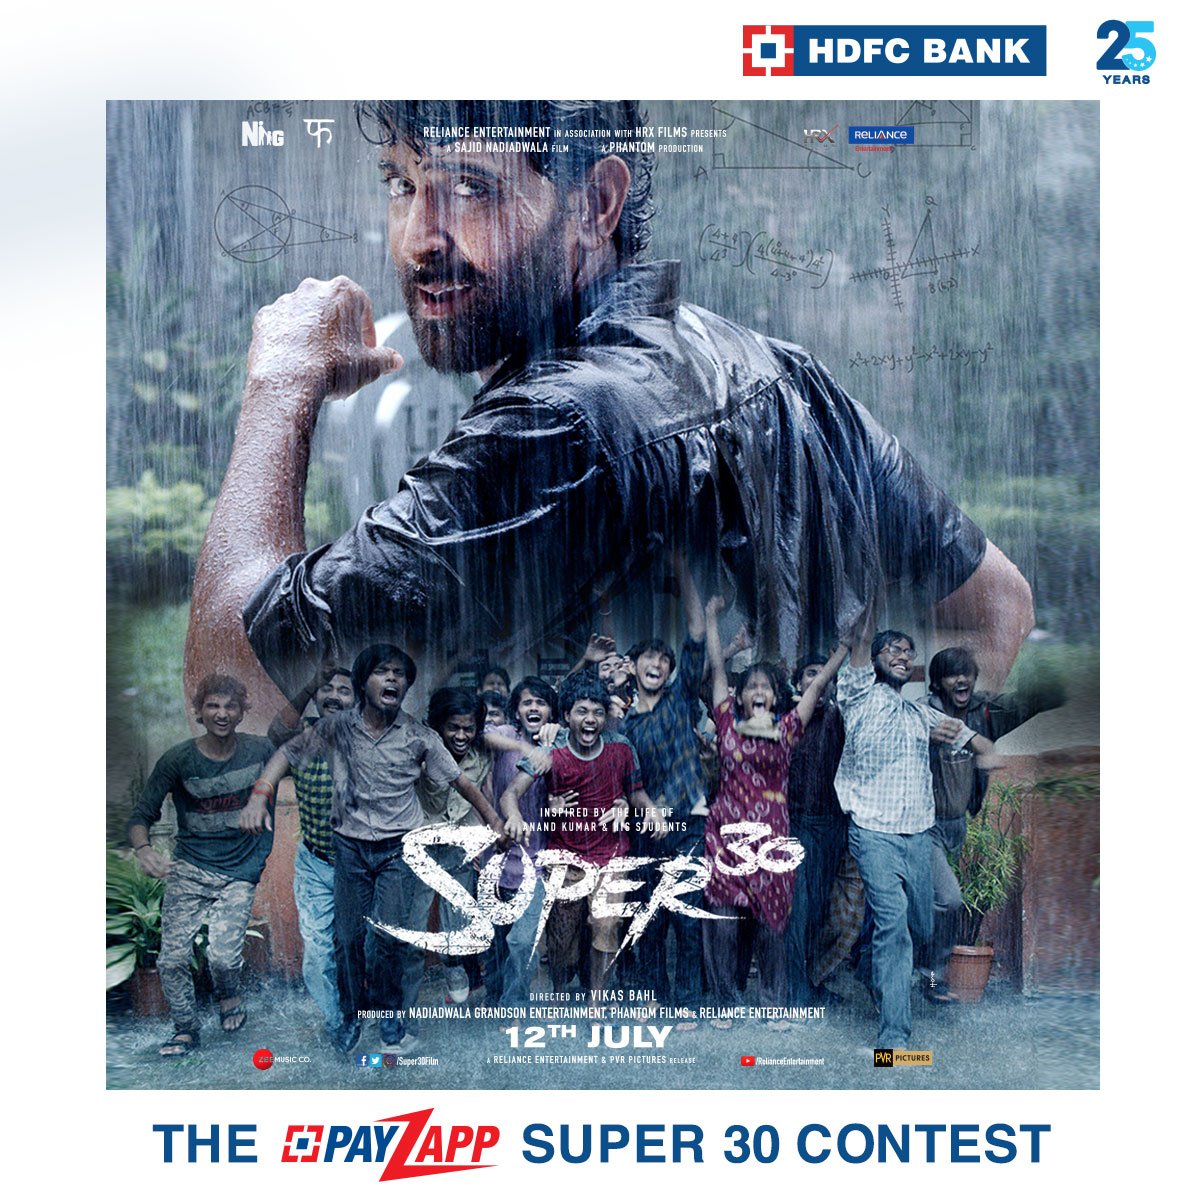 HDFC Bank on X: Calling all Movie Buffs! Here's your chance to win 30  Couple Movie Vouchers. All you have to do is - Answer a few simple  questions related to the